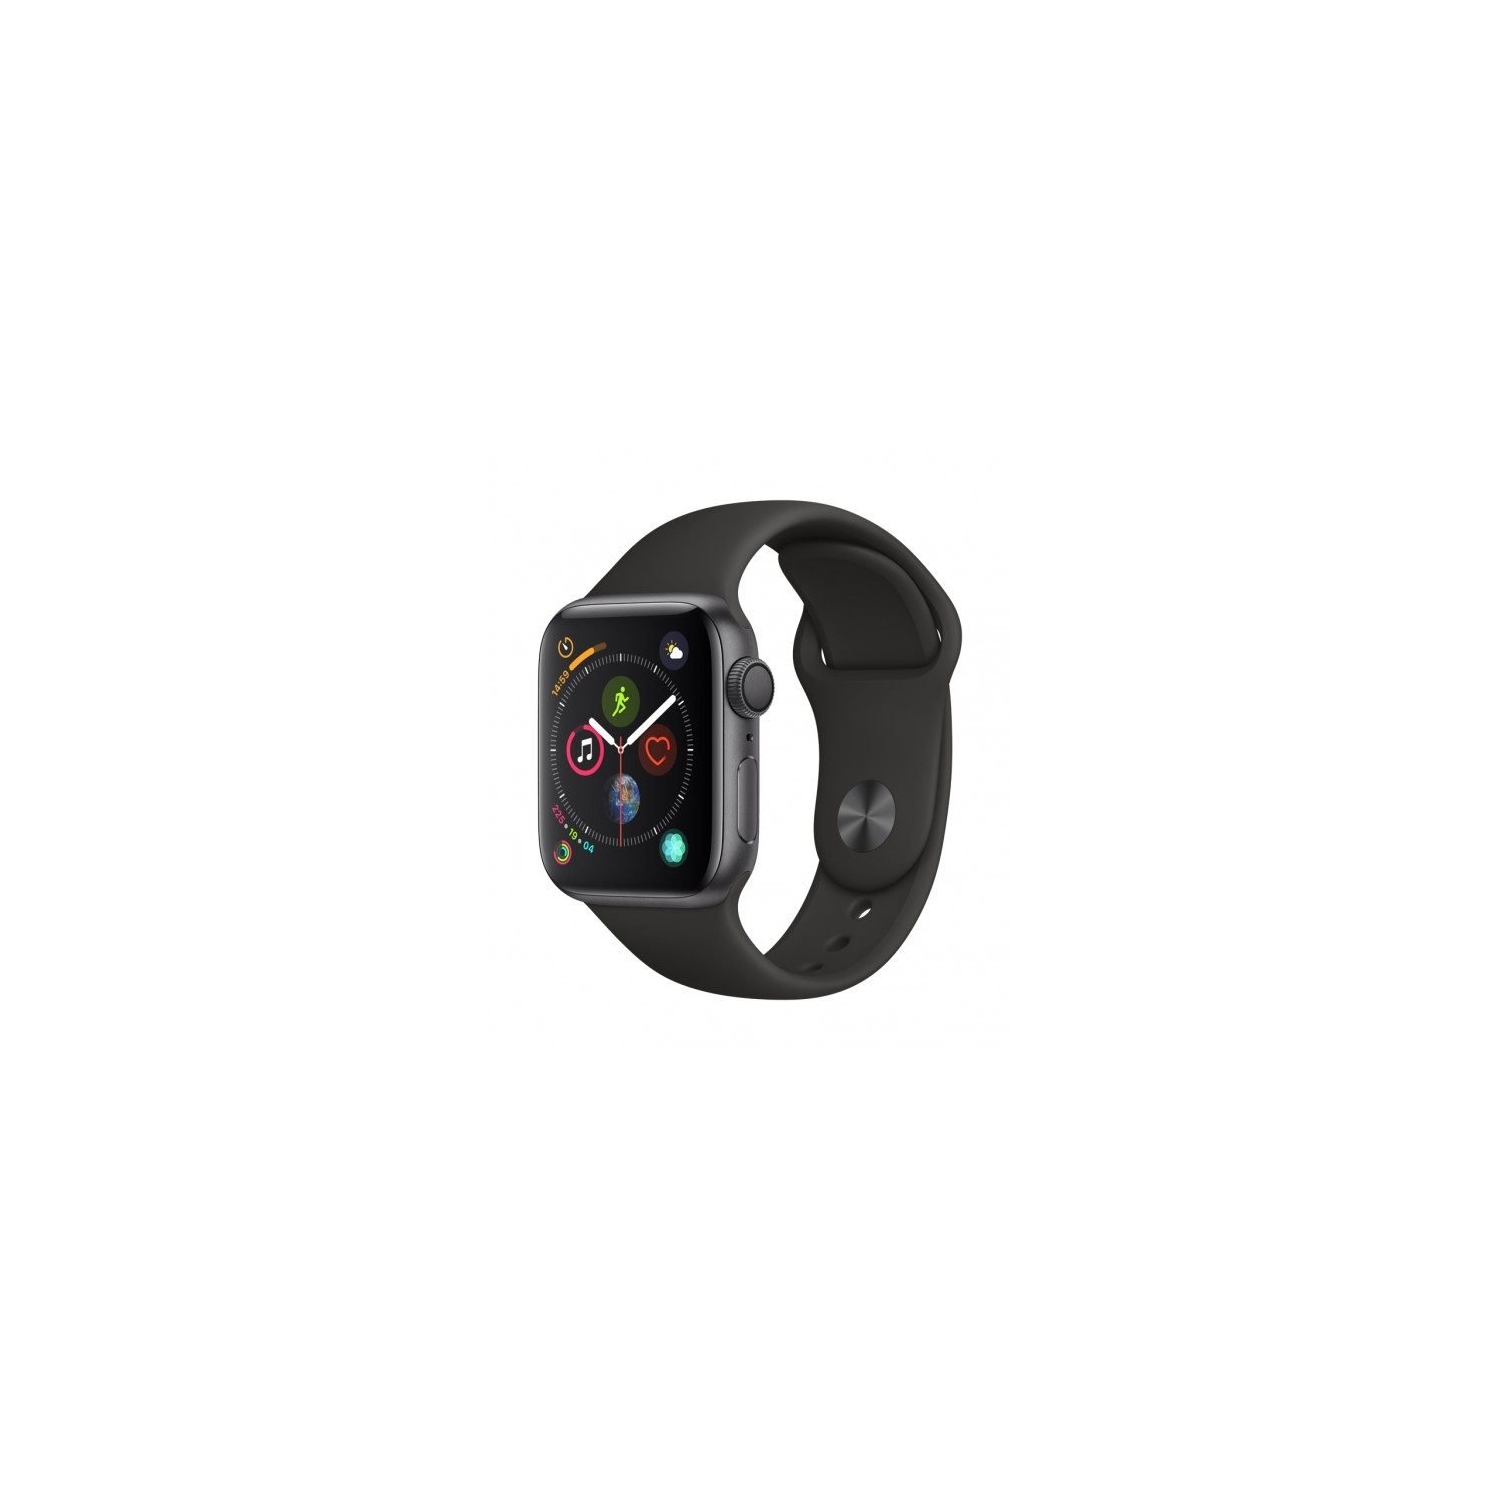 Apple Watch Series 4 (GPS + Cellular) 44mm Space Black Stainless Steel Case with Black Sport Band